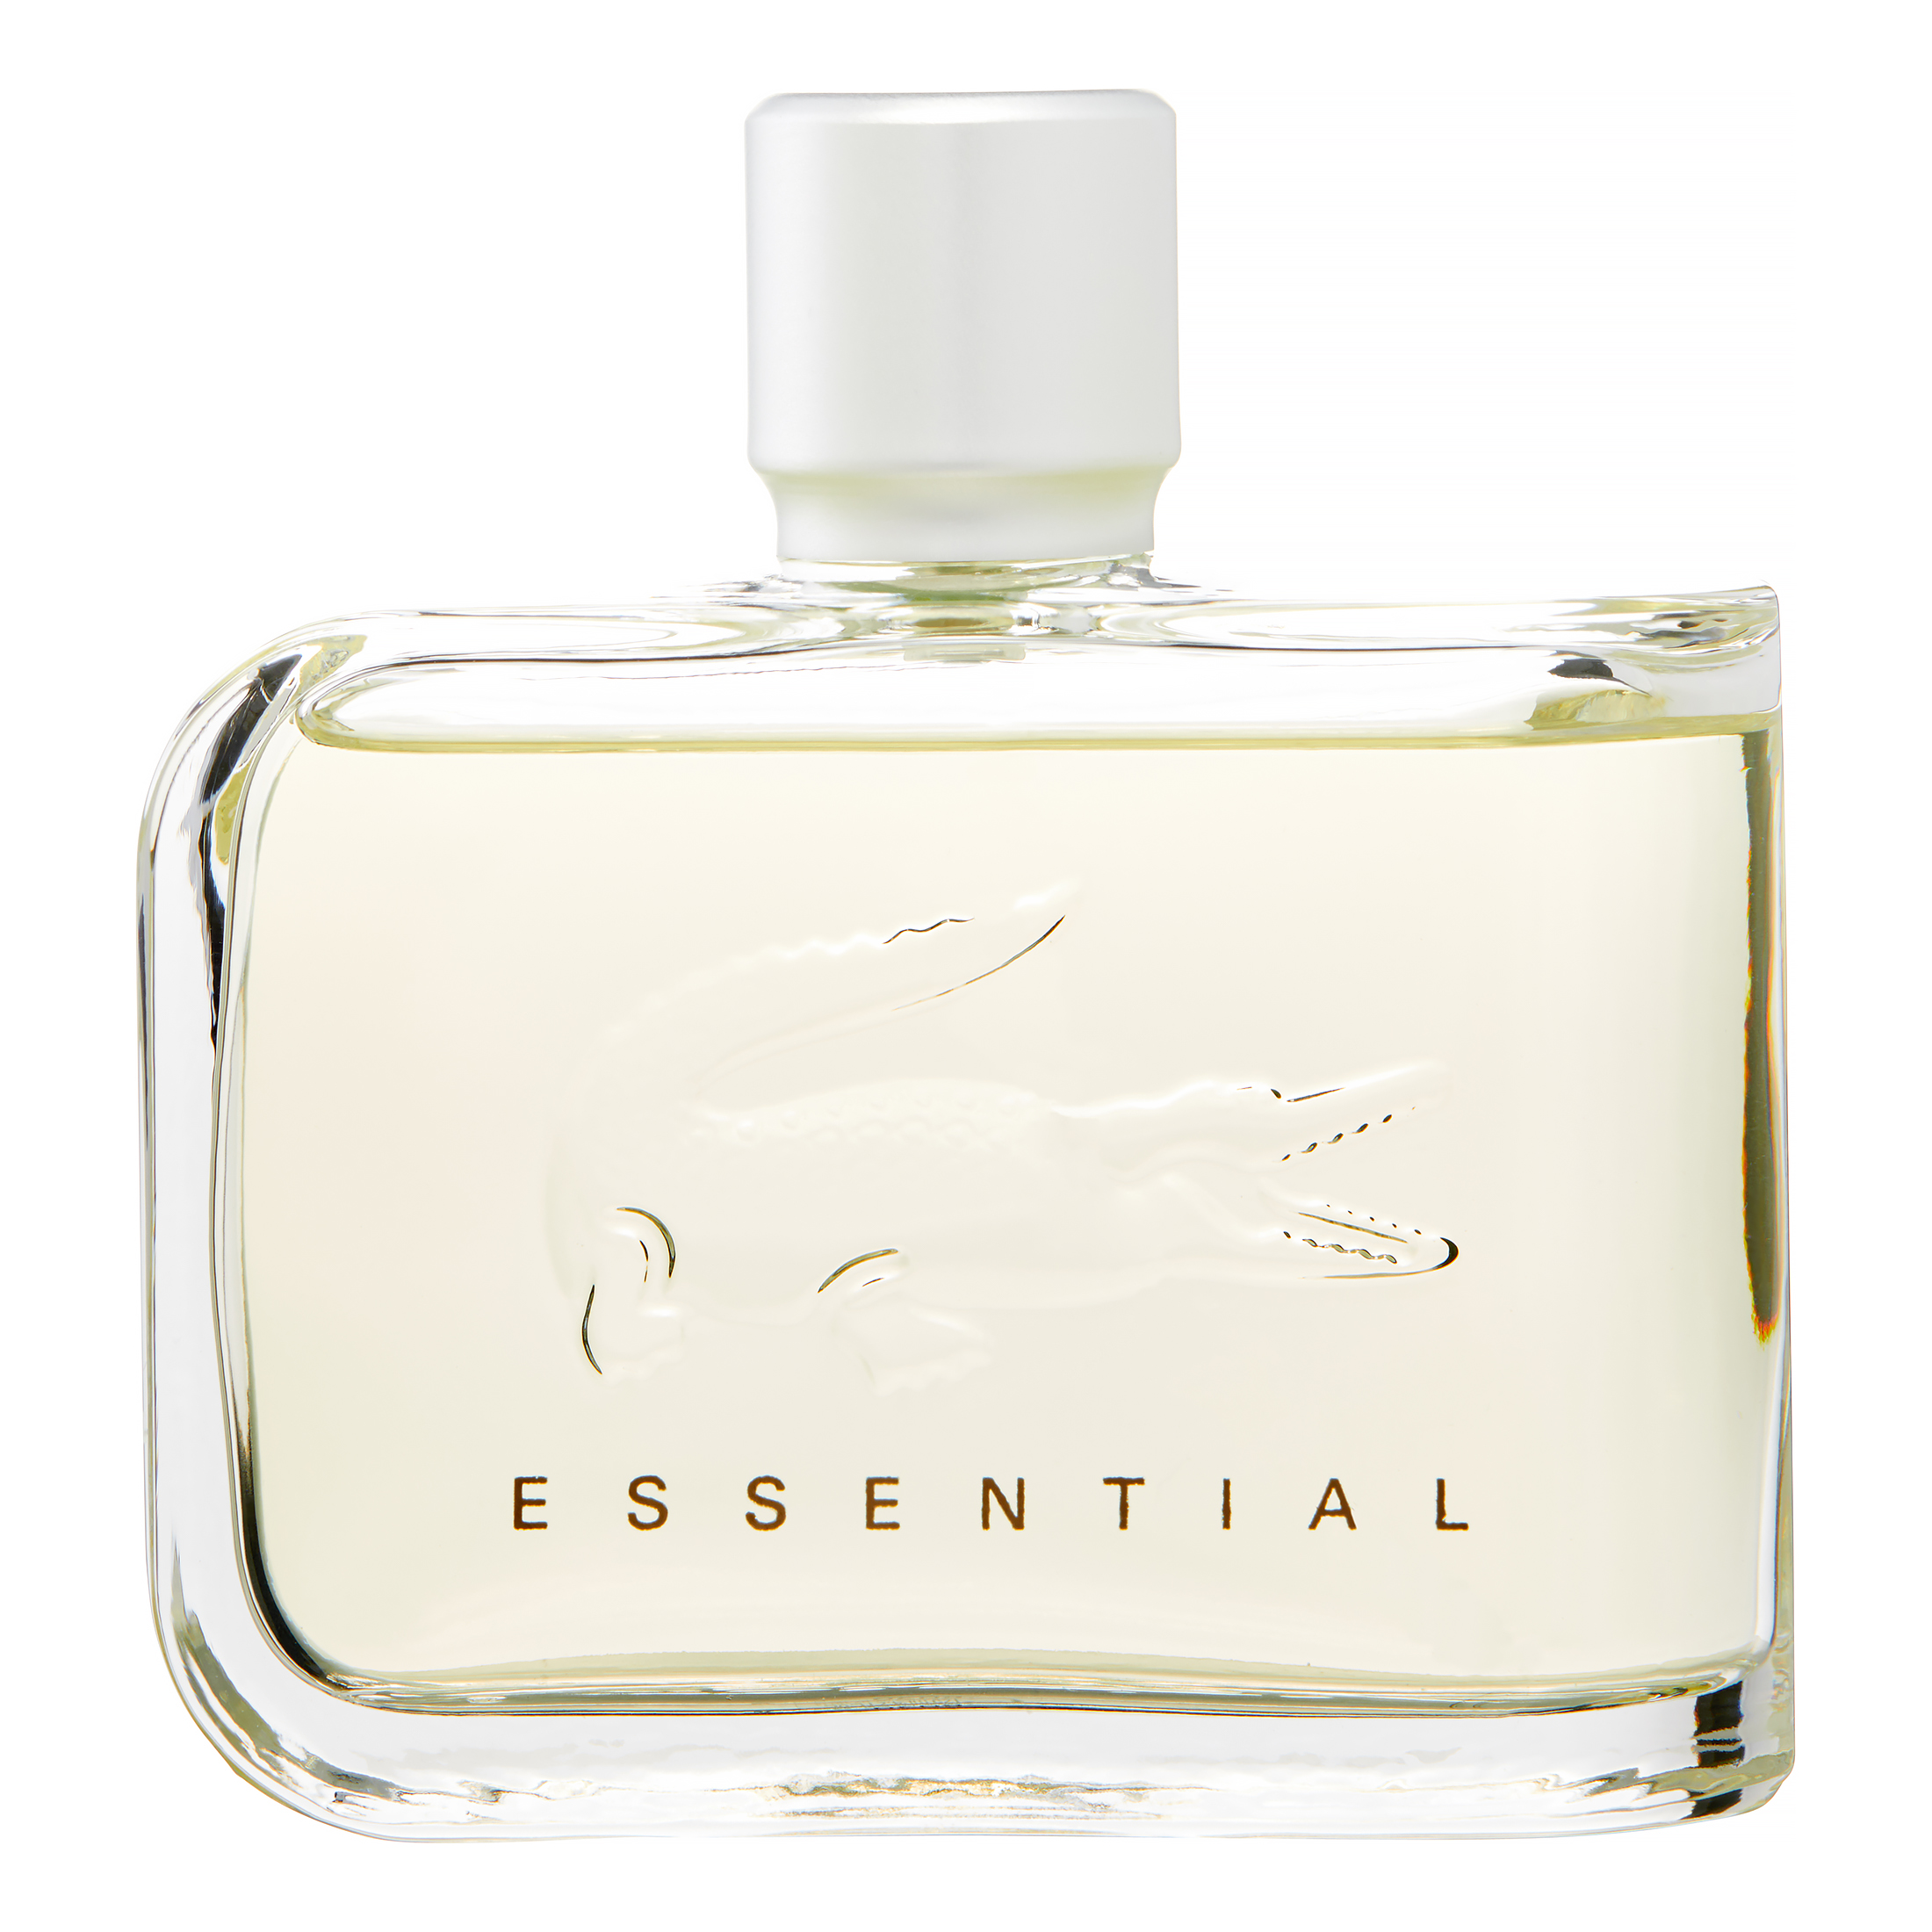 LACOSTE ESSENTIAL BY LACOSTE By LACOSTE For MEN - image 1 of 7